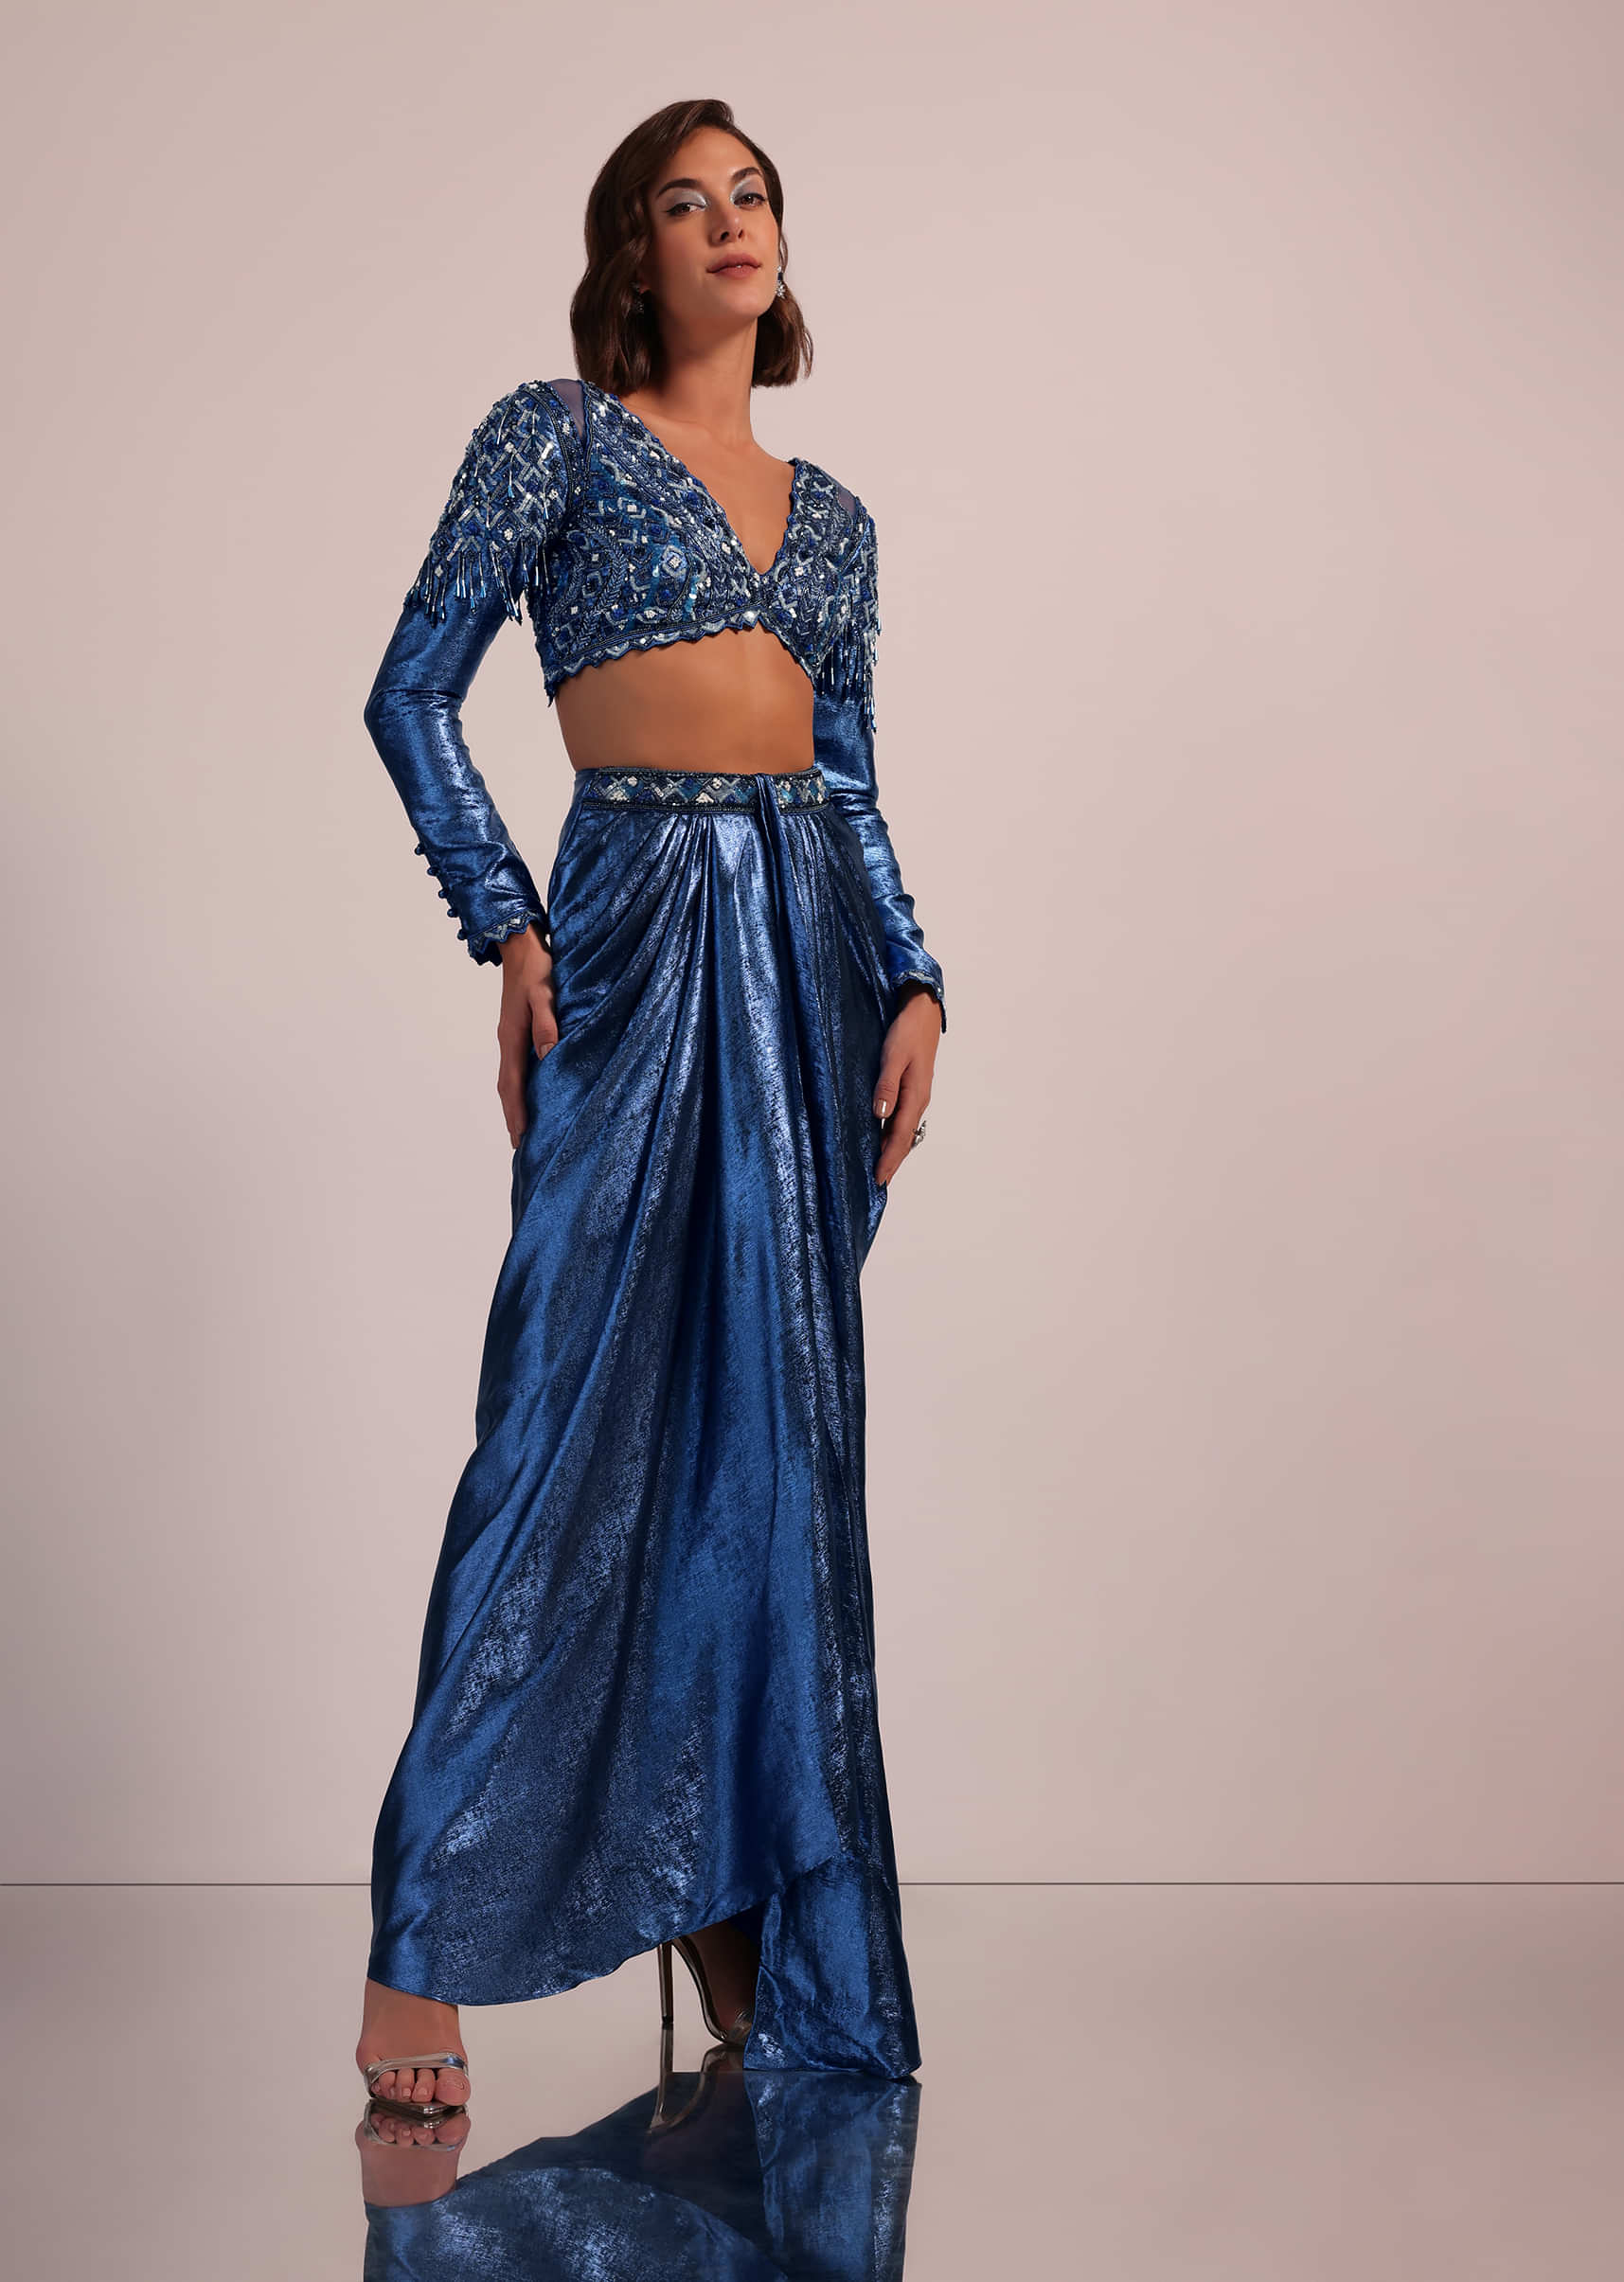 Metallic Blue Draped Skirt And Blouse With Heavy Embroidery